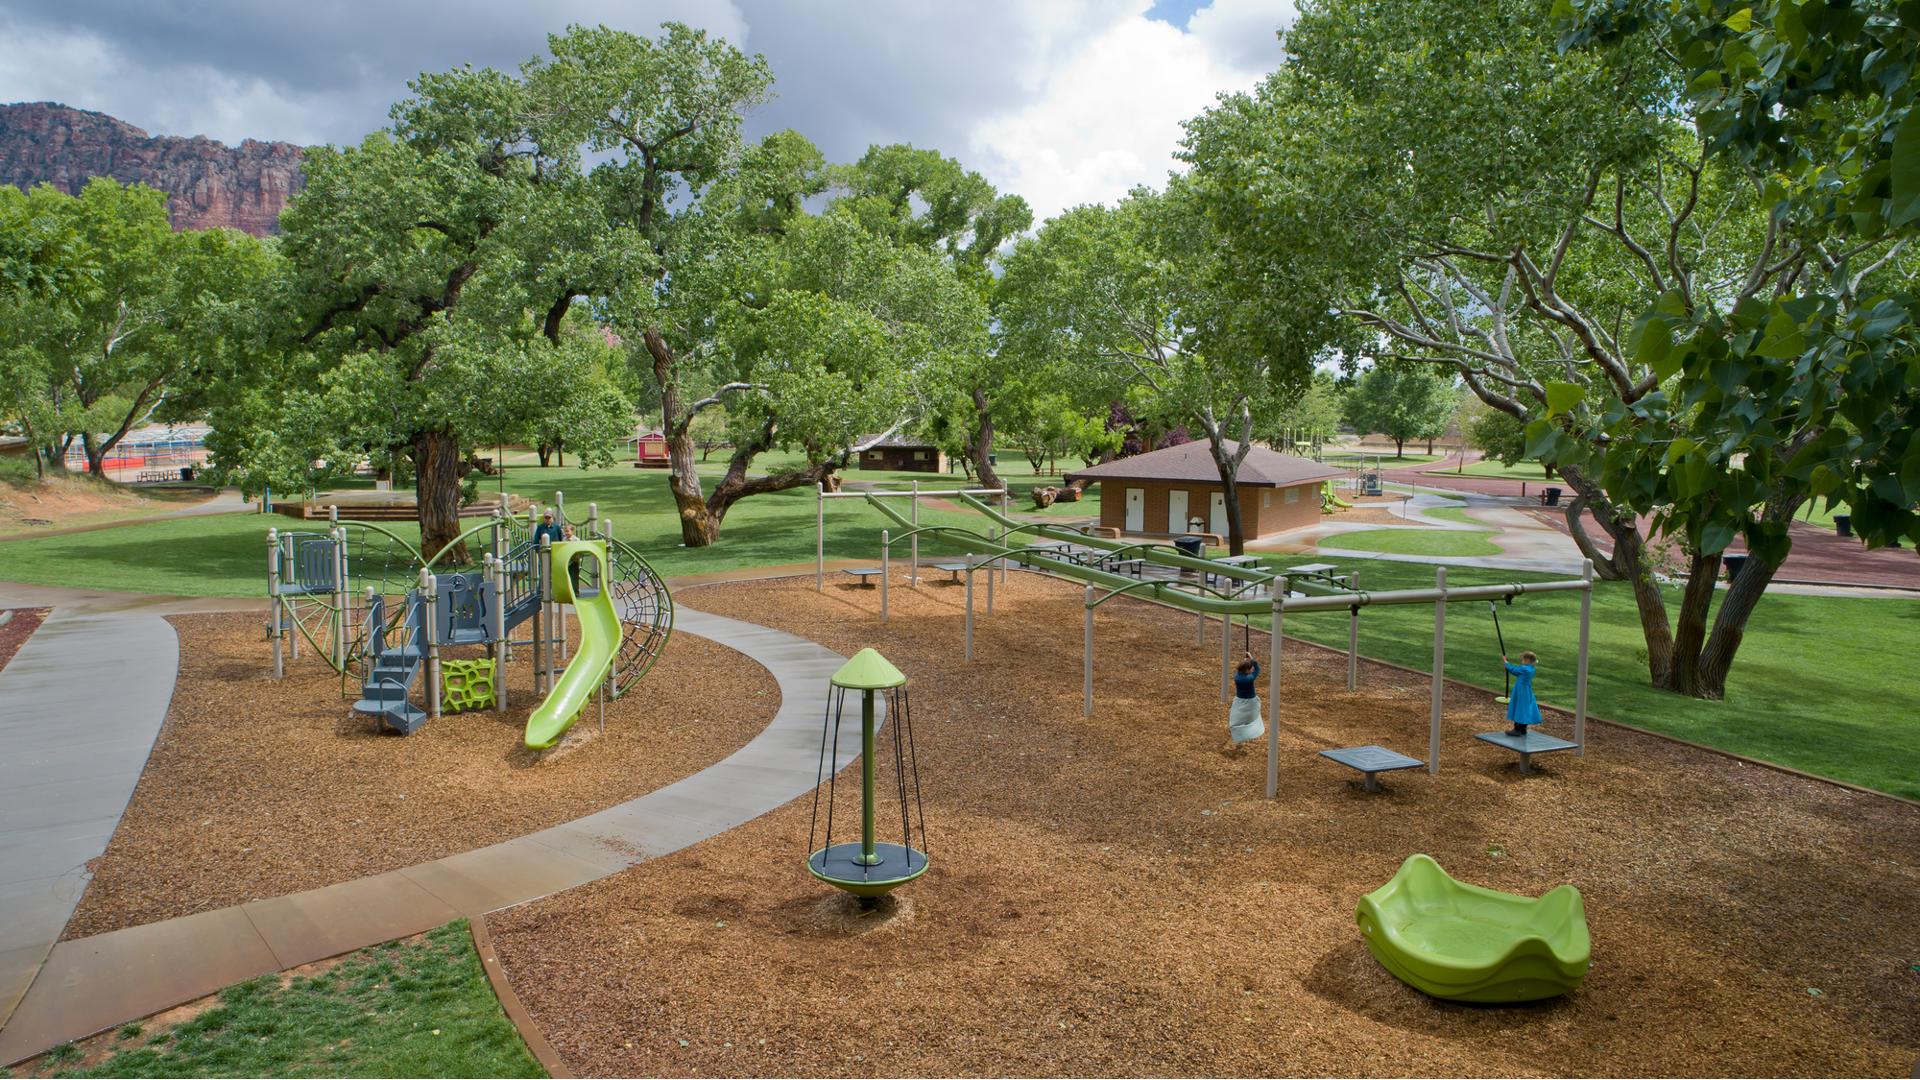 Cottonwood Park accommodate kids ages 2 to 5 and 5 to 12 featuring the ZipKrooz®, spinners and a PlayBooster® play structure with net climbers, slides and GeoPlex® climbing panels. The second playground 5 to 12-year-olds includes Netplex® play structure, a We-Saw™ and Oodle® Swing. The play area for toddlers and preschoolers features the Weevos® play system with age-appropriate challenges.